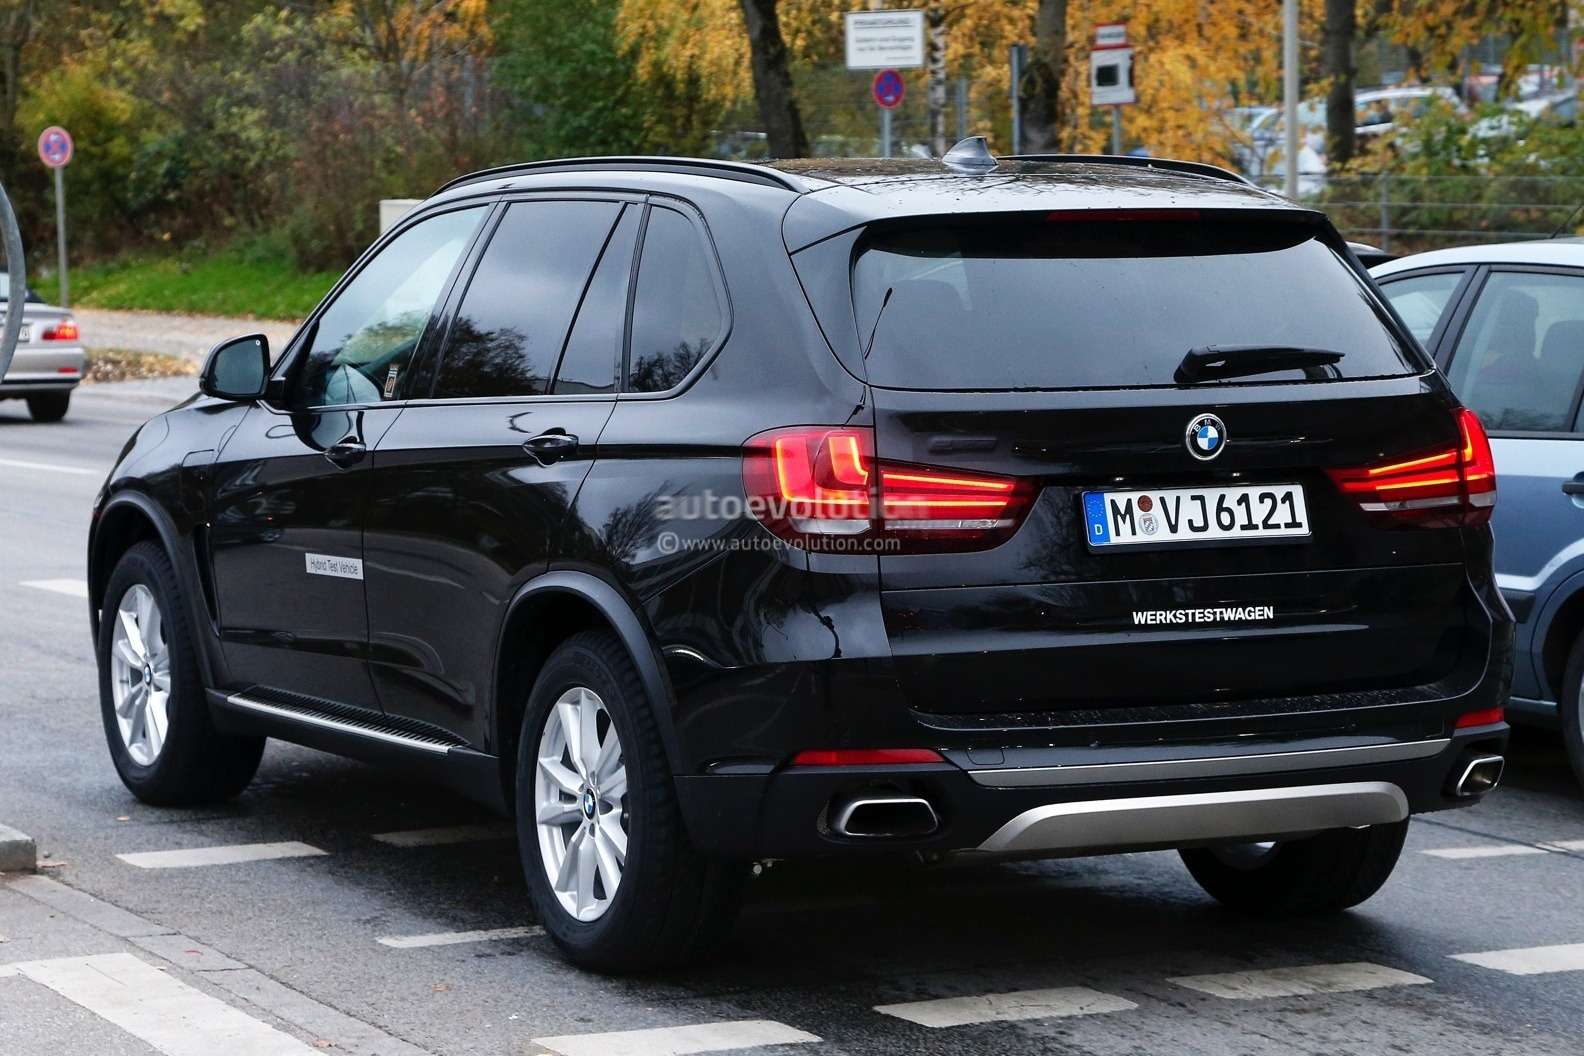 spyshots-hybrid-bmw-x5-goes-out-for-tests-in-traffic-1080p-6_no_copyright